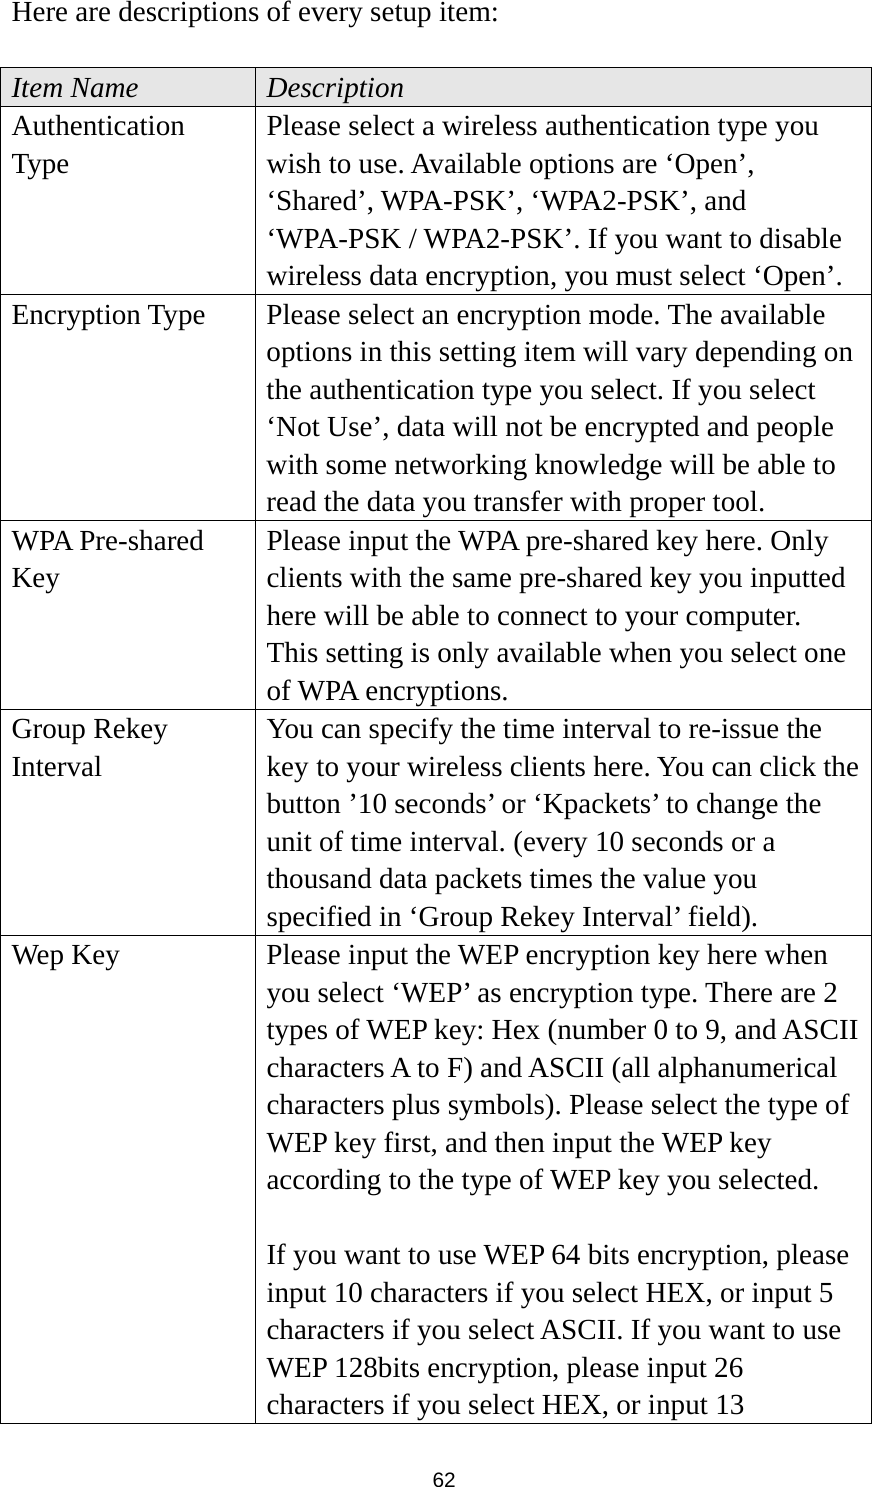  62 Here are descriptions of every setup item:  Item Name  Description Authentication Type Please select a wireless authentication type you wish to use. Available options are ‘Open’, ‘Shared’, WPA-PSK’, ‘WPA2-PSK’, and ‘WPA-PSK / WPA2-PSK’. If you want to disable wireless data encryption, you must select ‘Open’. Encryption Type  Please select an encryption mode. The available options in this setting item will vary depending on the authentication type you select. If you select ‘Not Use’, data will not be encrypted and people with some networking knowledge will be able to read the data you transfer with proper tool. WPA Pre-shared Key Please input the WPA pre-shared key here. Only clients with the same pre-shared key you inputted here will be able to connect to your computer. This setting is only available when you select one of WPA encryptions. Group Rekey Interval You can specify the time interval to re-issue the key to your wireless clients here. You can click the button ’10 seconds’ or ‘Kpackets’ to change the unit of time interval. (every 10 seconds or a thousand data packets times the value you specified in ‘Group Rekey Interval’ field). Wep Key  Please input the WEP encryption key here when you select ‘WEP’ as encryption type. There are 2 types of WEP key: Hex (number 0 to 9, and ASCII characters A to F) and ASCII (all alphanumerical characters plus symbols). Please select the type of WEP key first, and then input the WEP key according to the type of WEP key you selected.  If you want to use WEP 64 bits encryption, please input 10 characters if you select HEX, or input 5 characters if you select ASCII. If you want to use WEP 128bits encryption, please input 26 characters if you select HEX, or input 13 